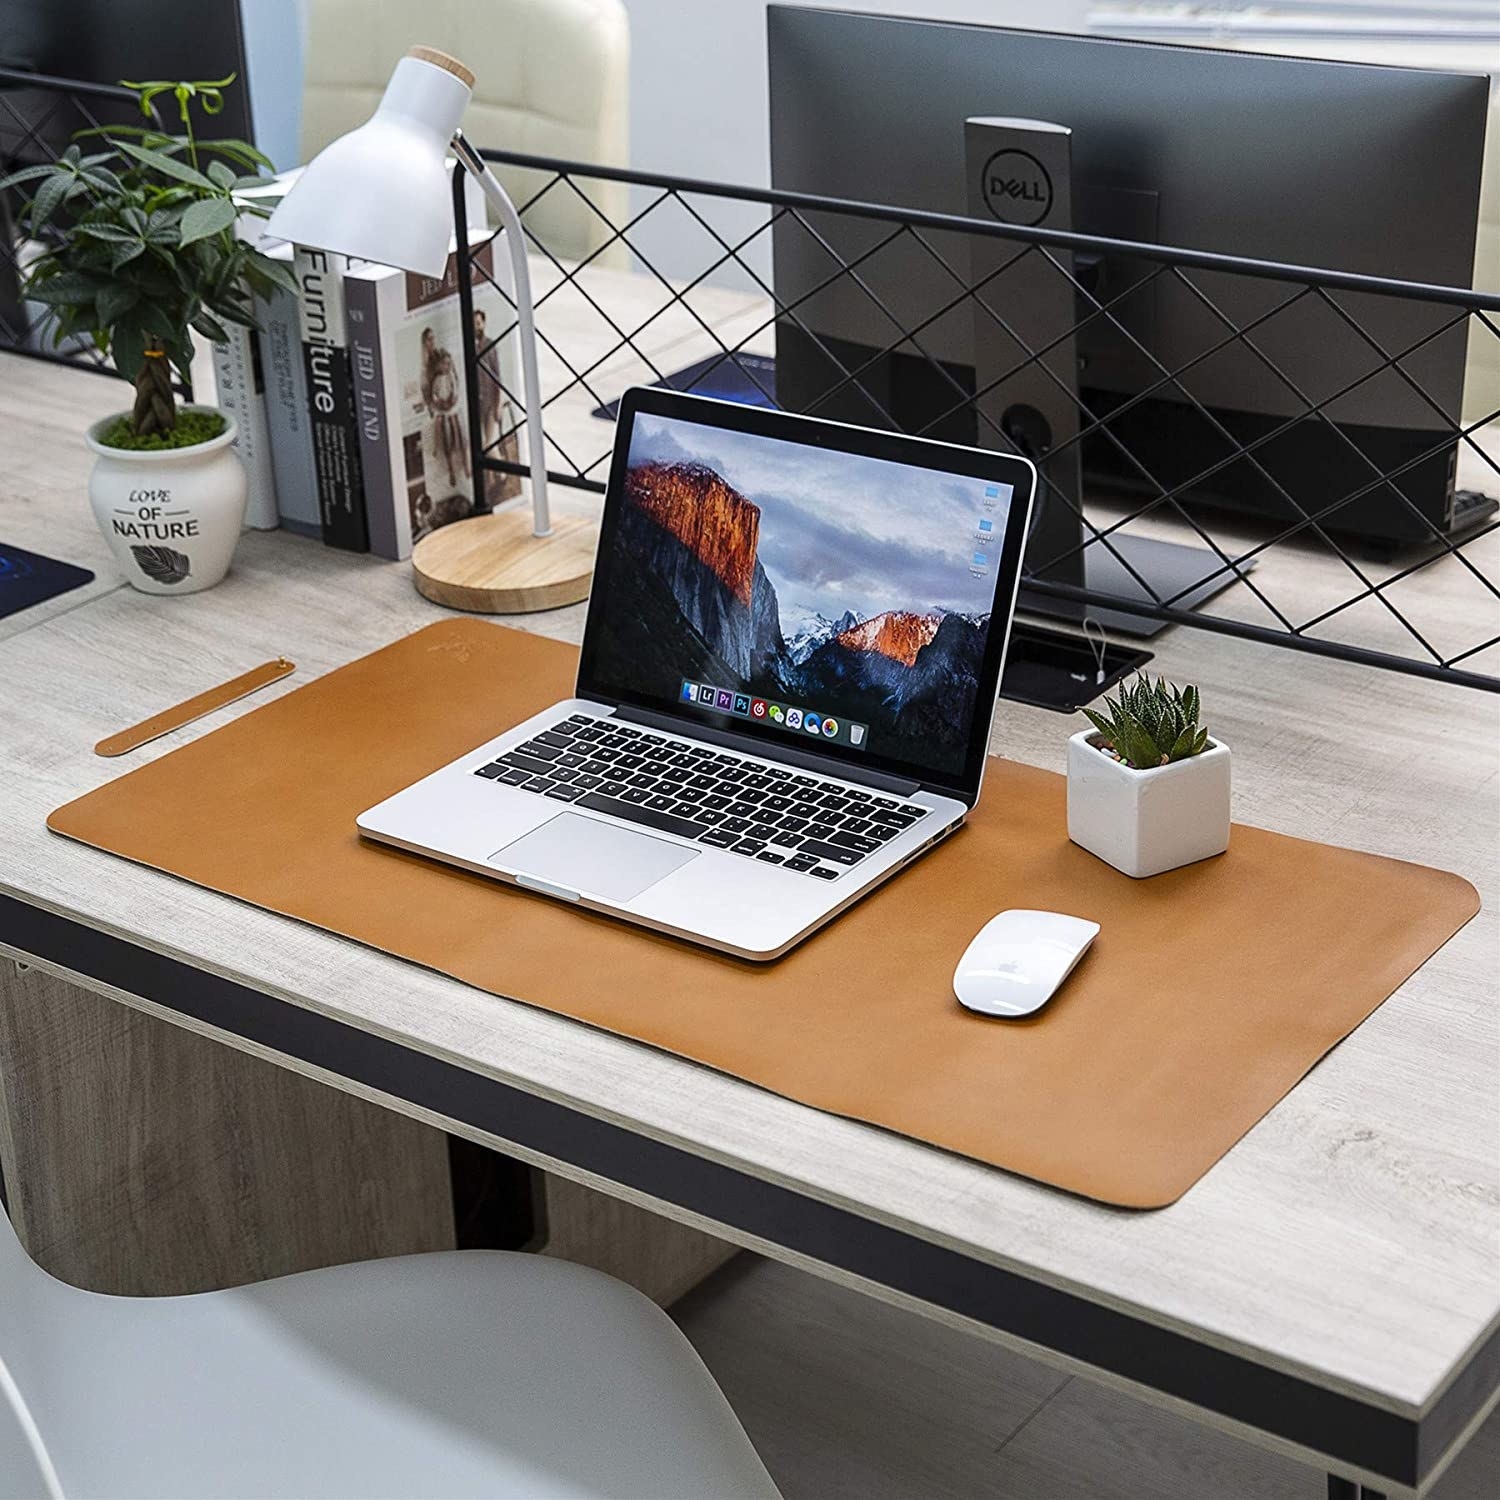 A desk with a laptop and mouse on it under a leathery rectangular mat